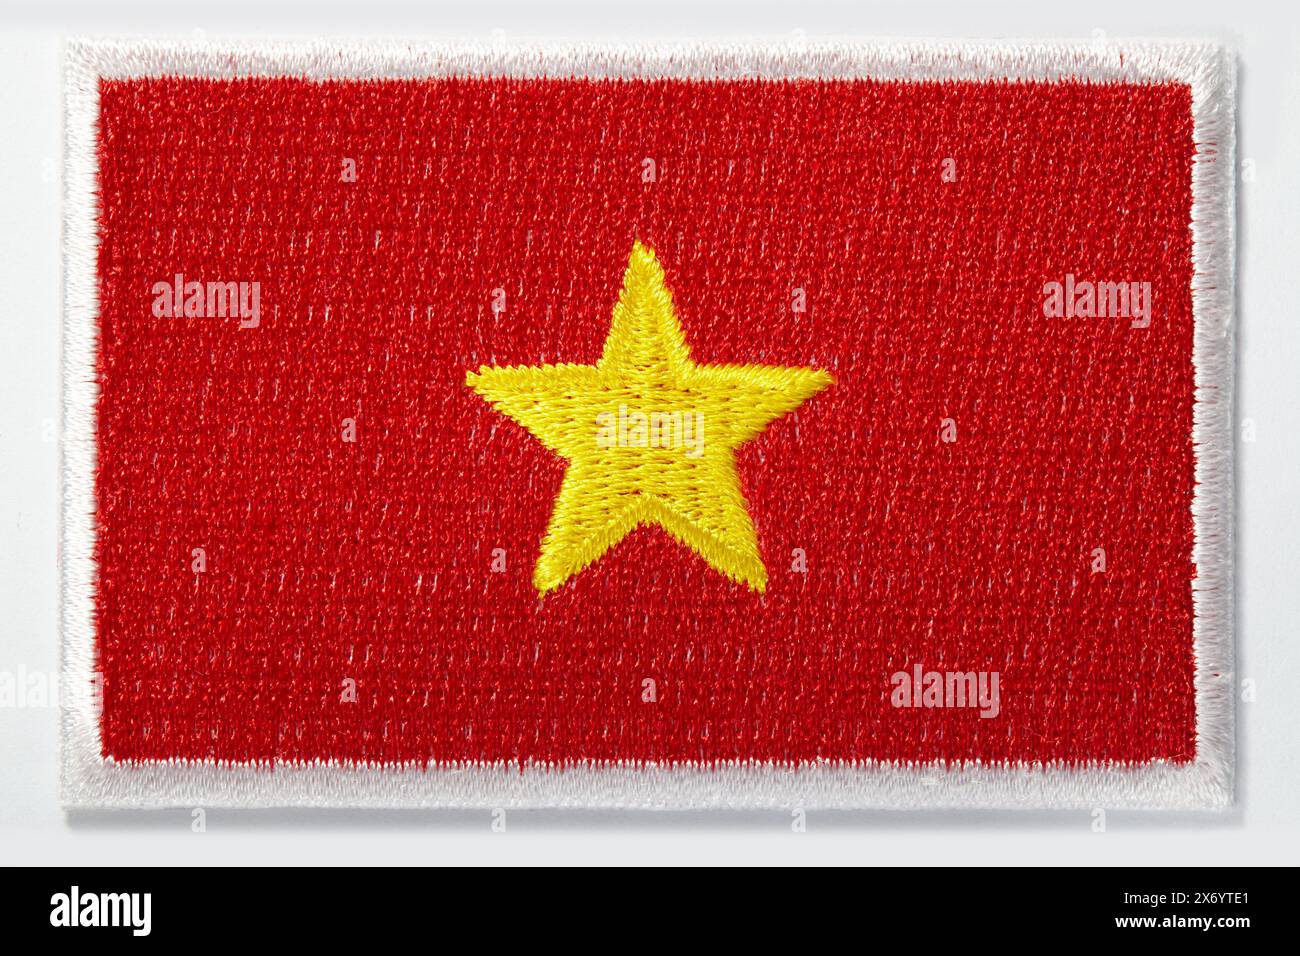 Embroidered emblem of the Vietnamese national flag with one yellow star in the middle of red Stock Photo